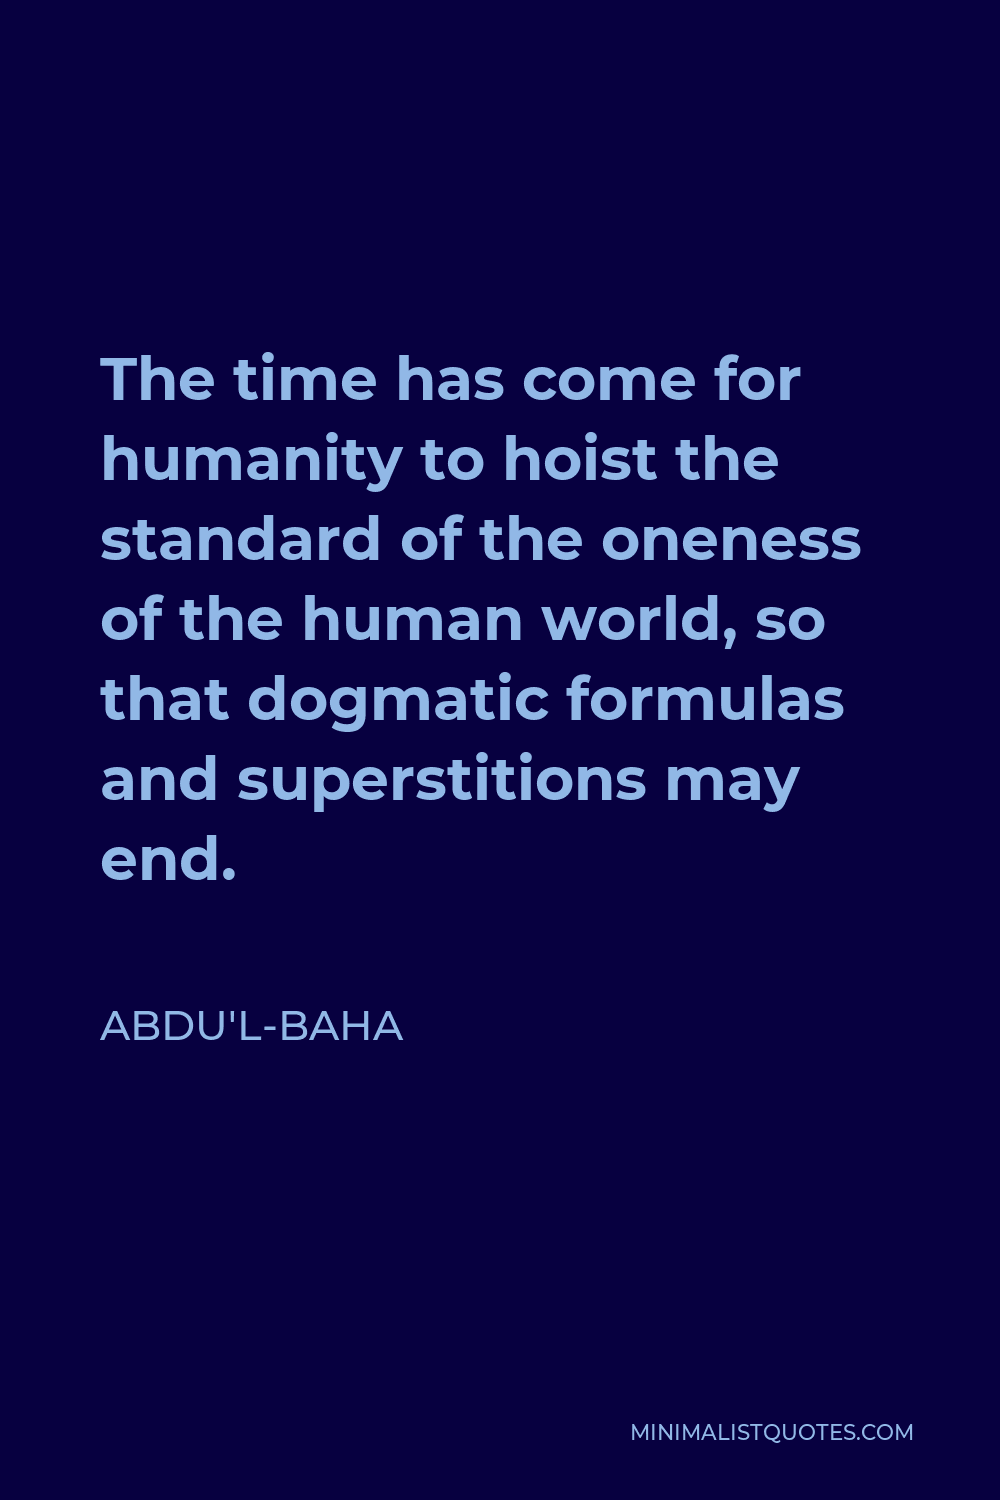 Abdu'l-Baha Quote - The time has come for humanity to hoist the standard of the oneness of the human world, so that dogmatic formulas and superstitions may end.